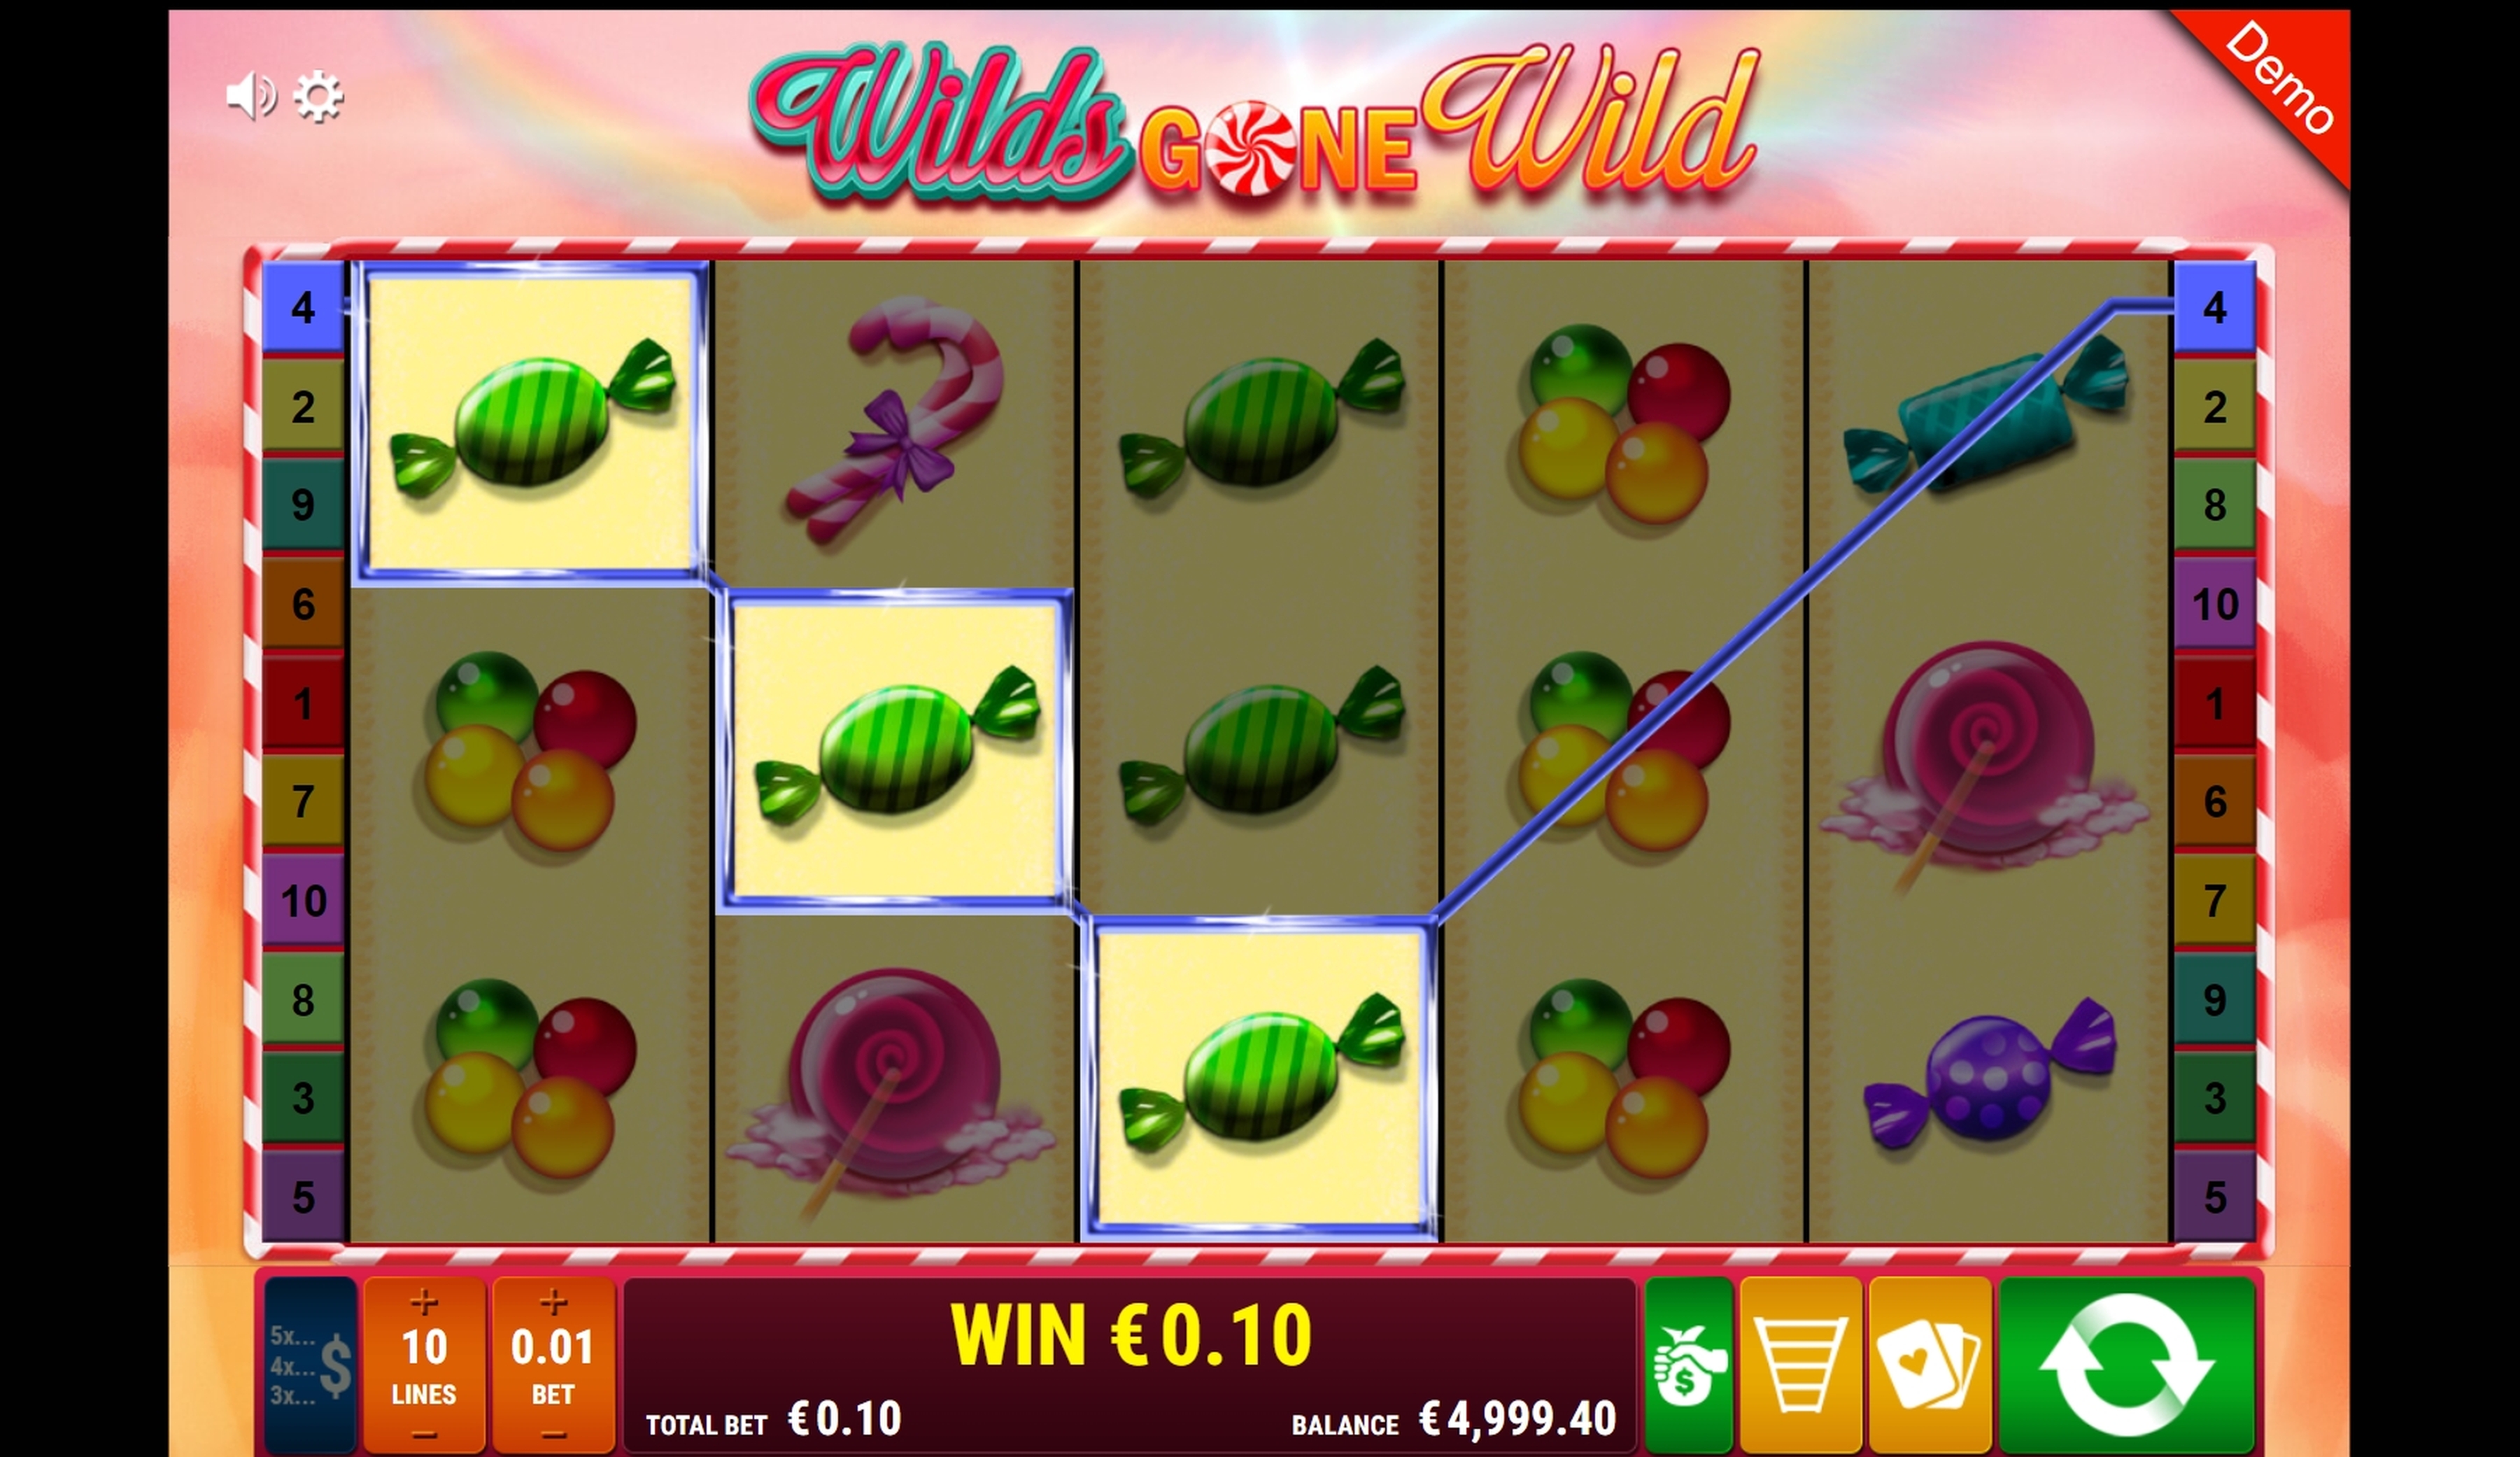 Win Money in Wilds gone wild Free Slot Game by Gamomat